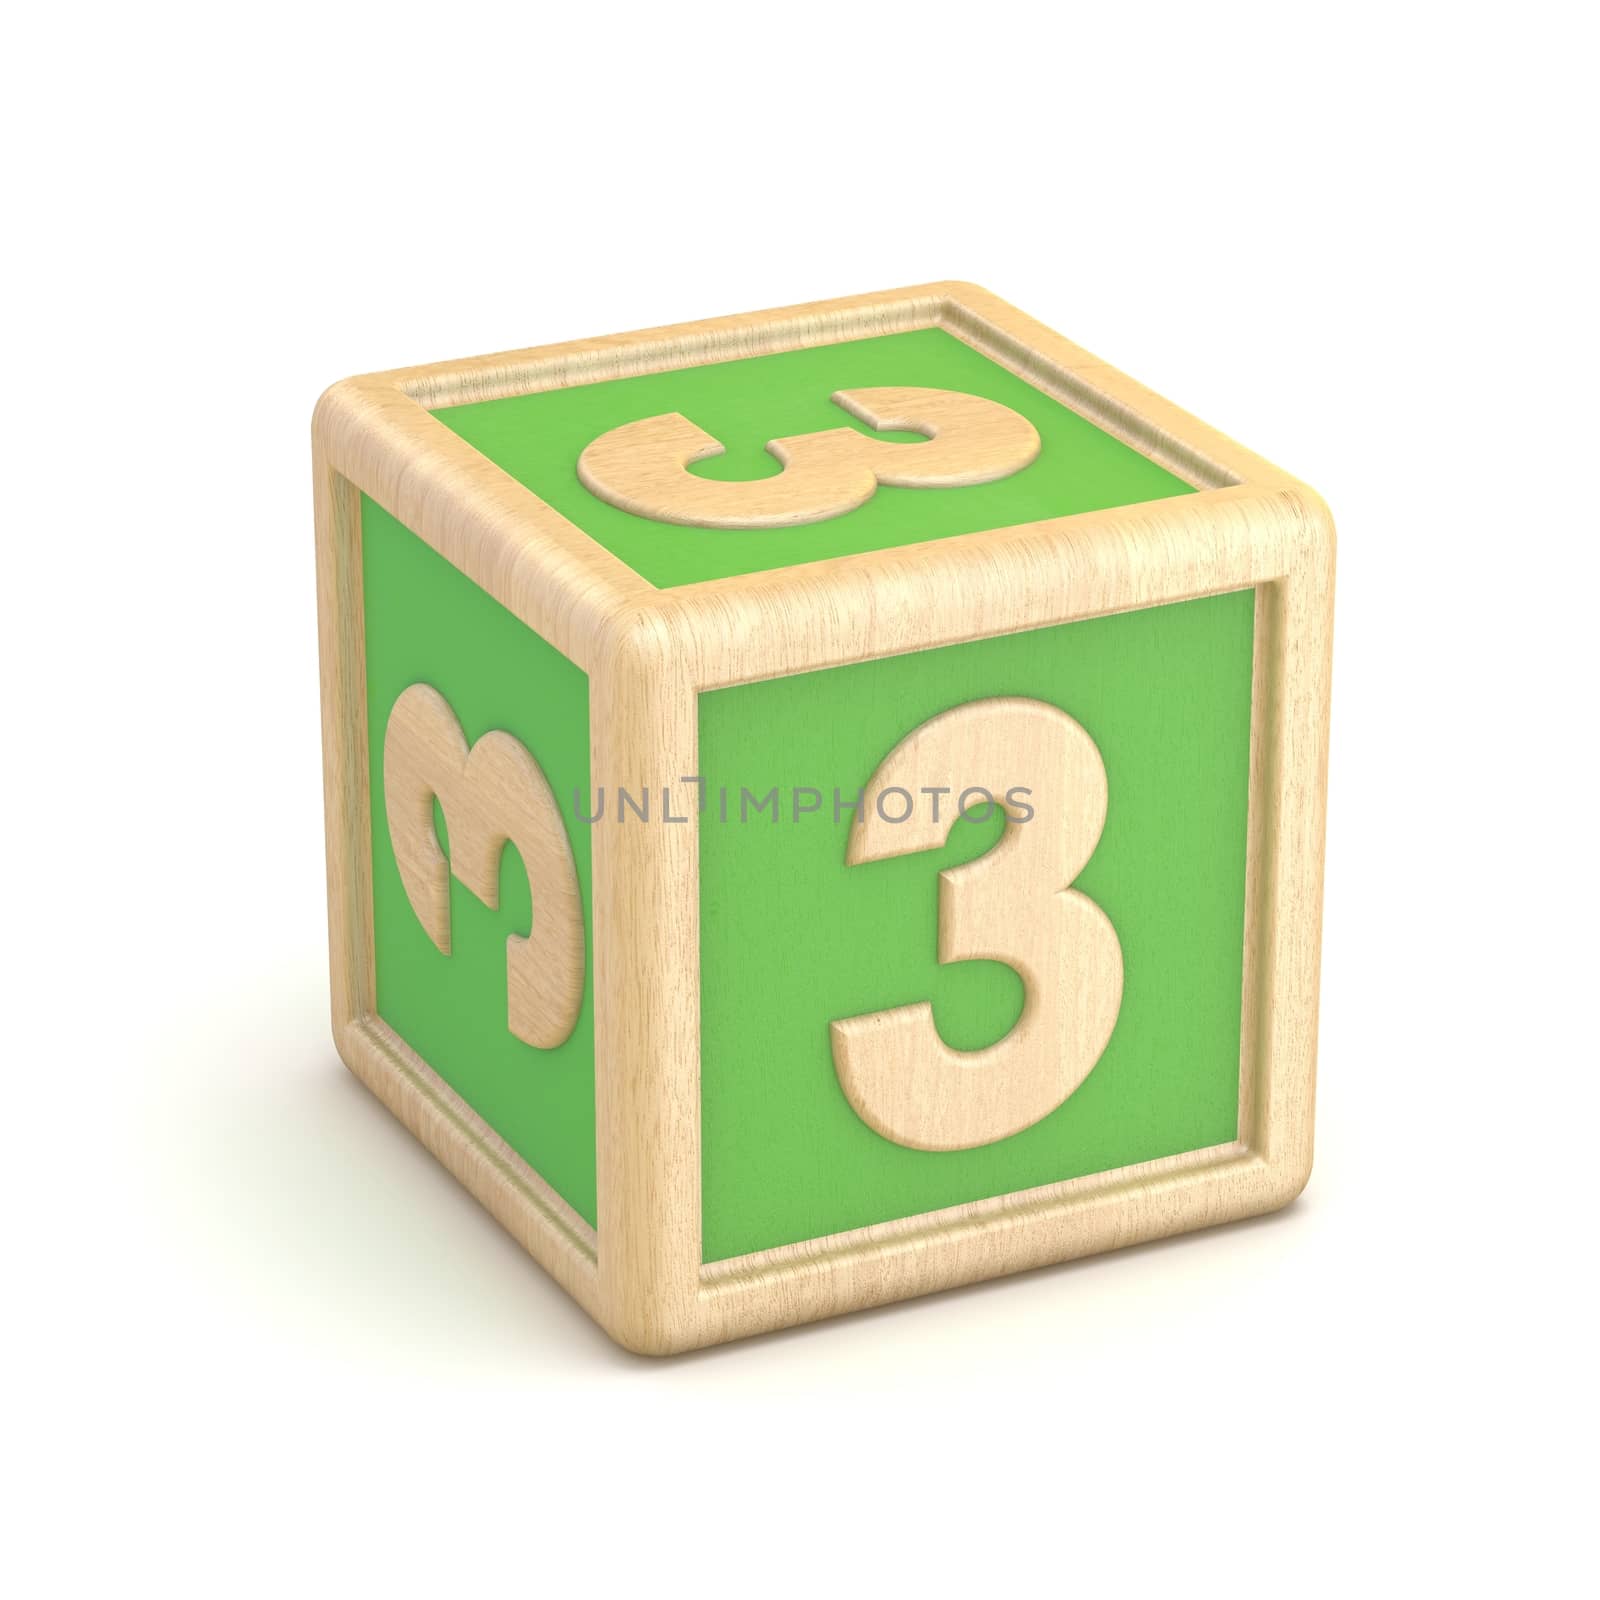 Number 3 THREE wooden alphabet blocks font rotated. 3D render illustration isolated on white background